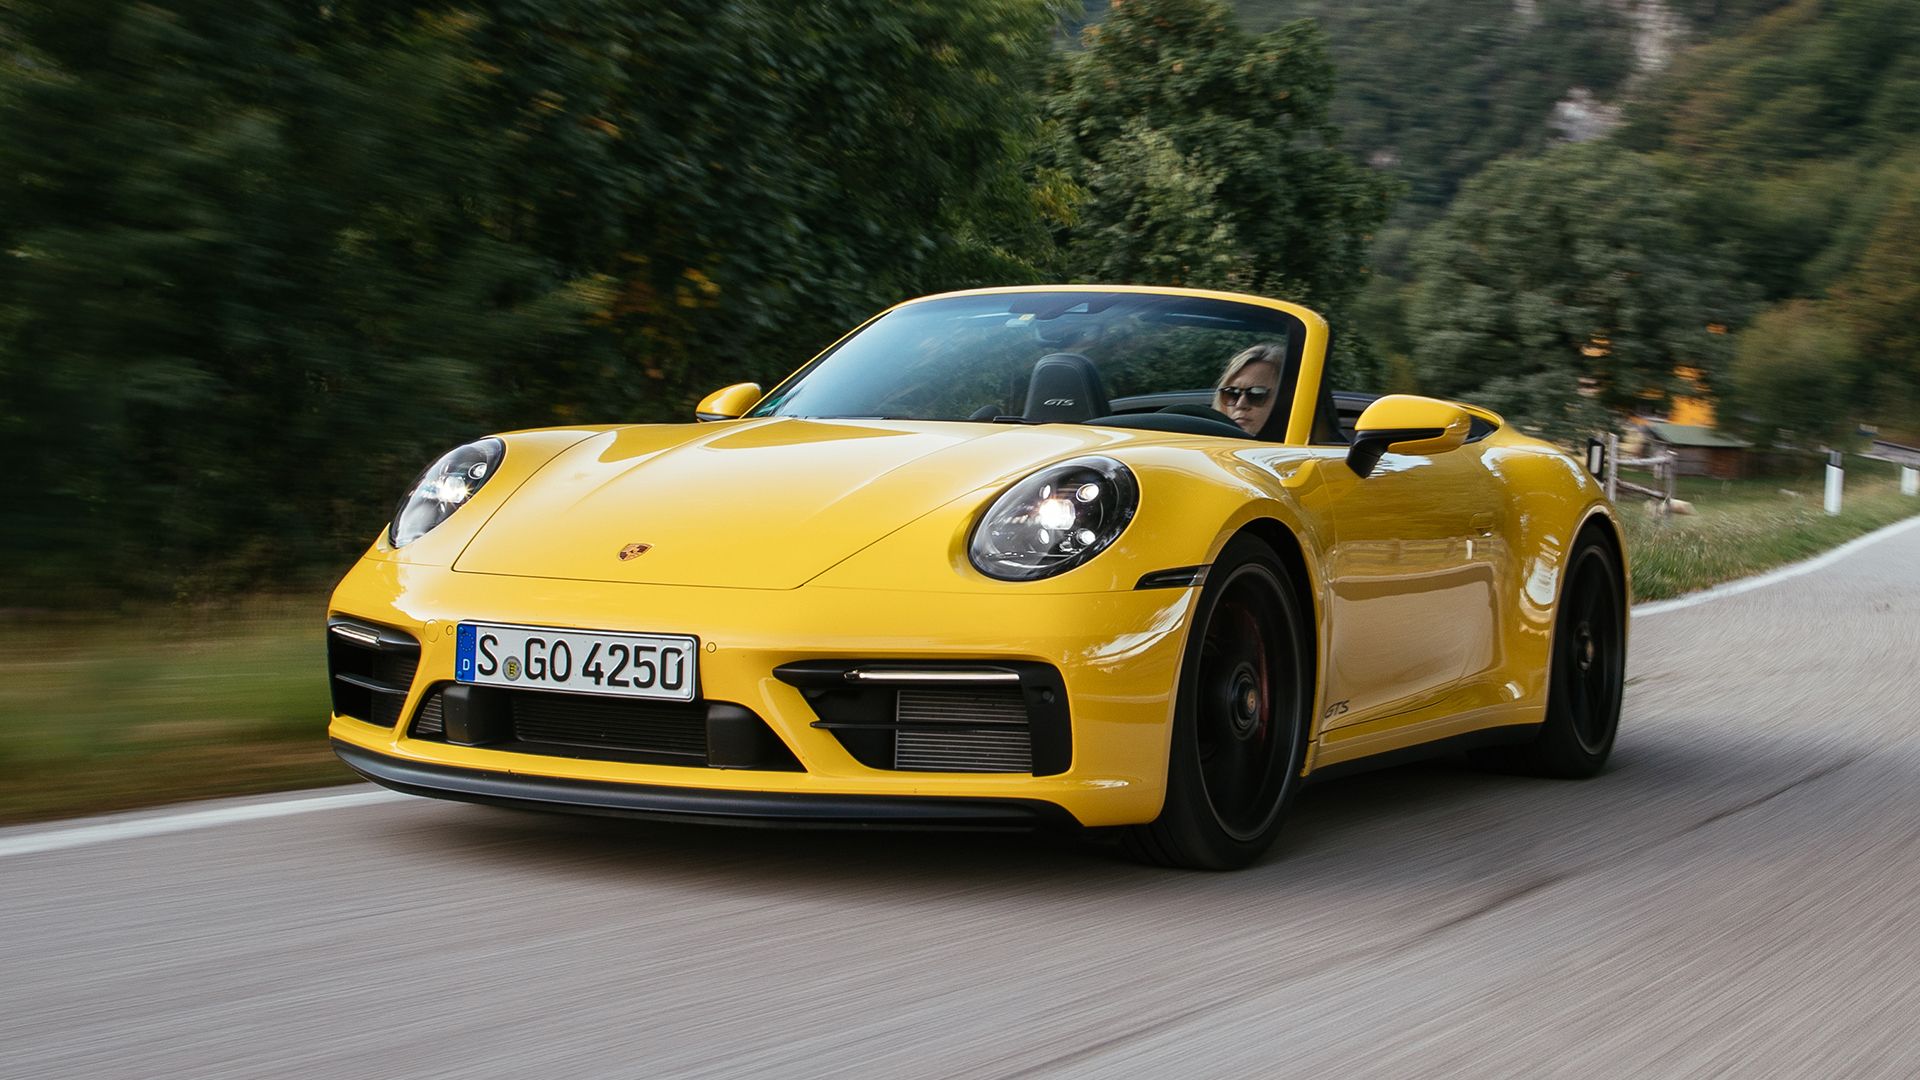 2020 Porsche 911 Cabriolet's Soft Top Brings Coupe-Like Looks And Comfort